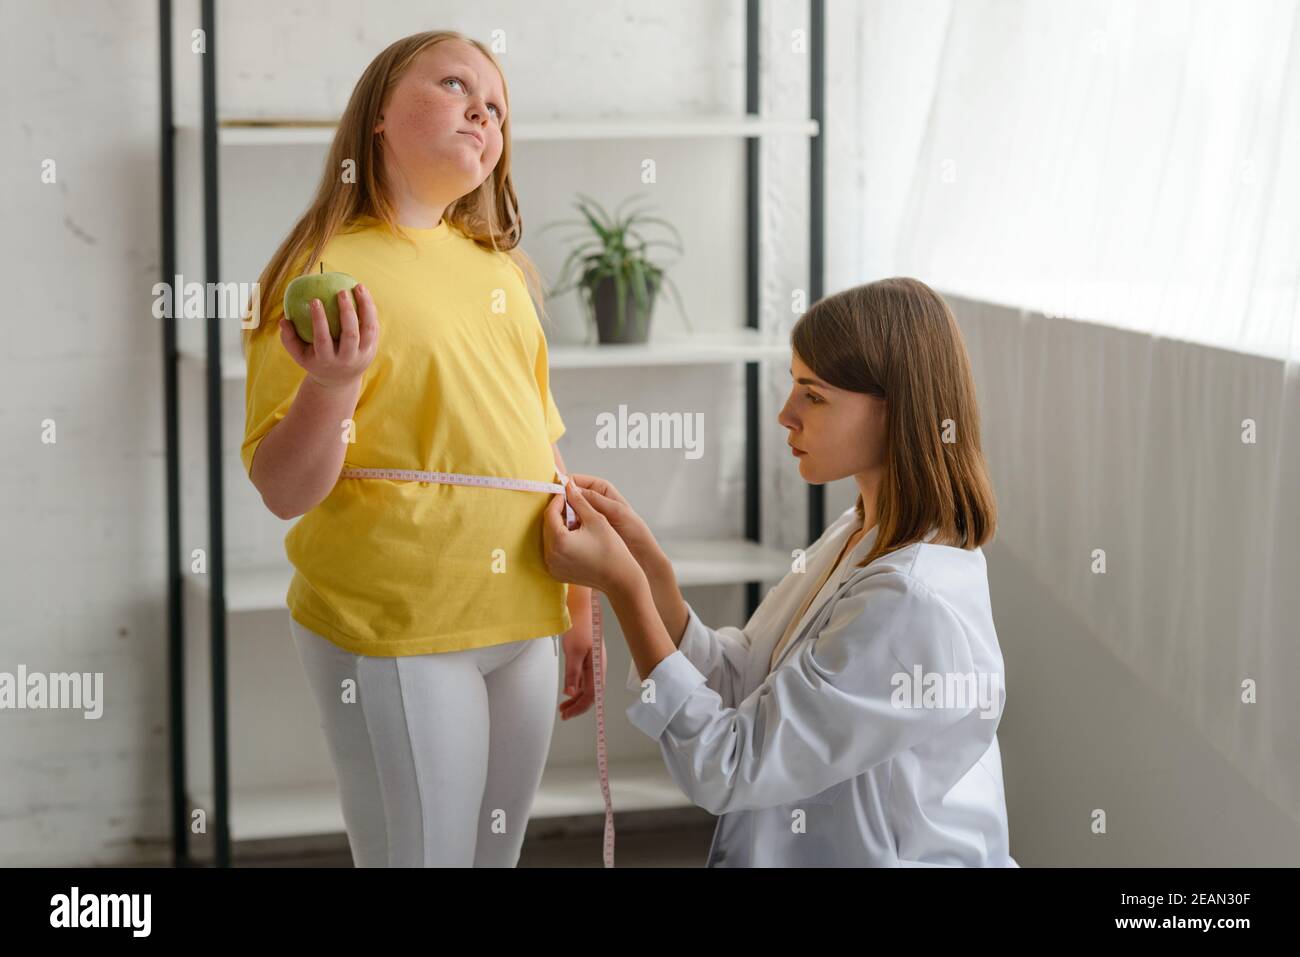 Nutritionist measuring obese girl's waist. Childhood obesity and weight loss Stock Photo